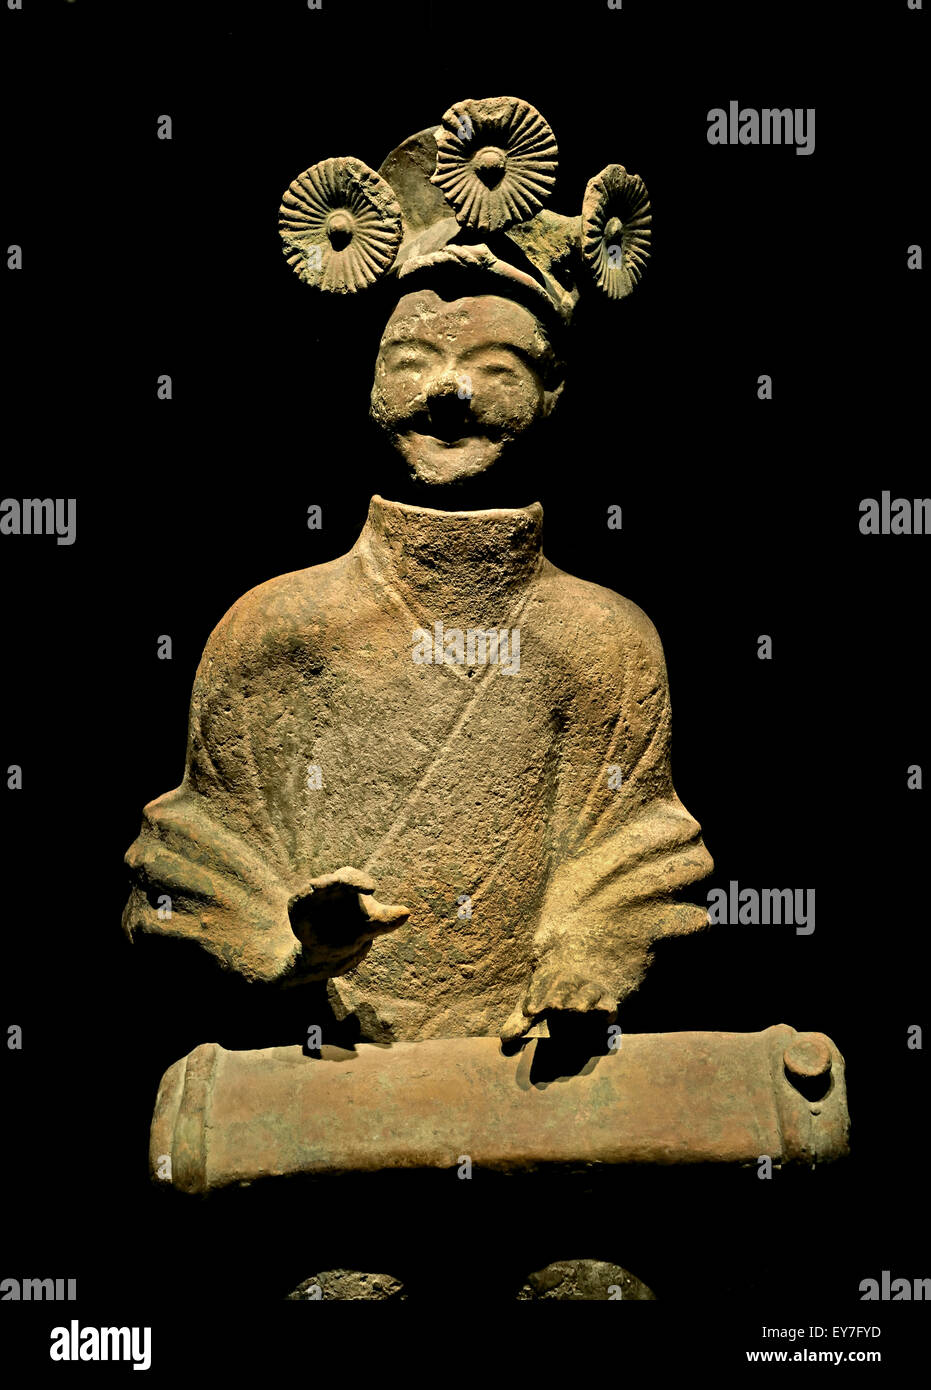 Pottery figure playing lute, eastern Han AD 25 - 220 Shanghai Museum of ancient Chinese art China Stock Photo